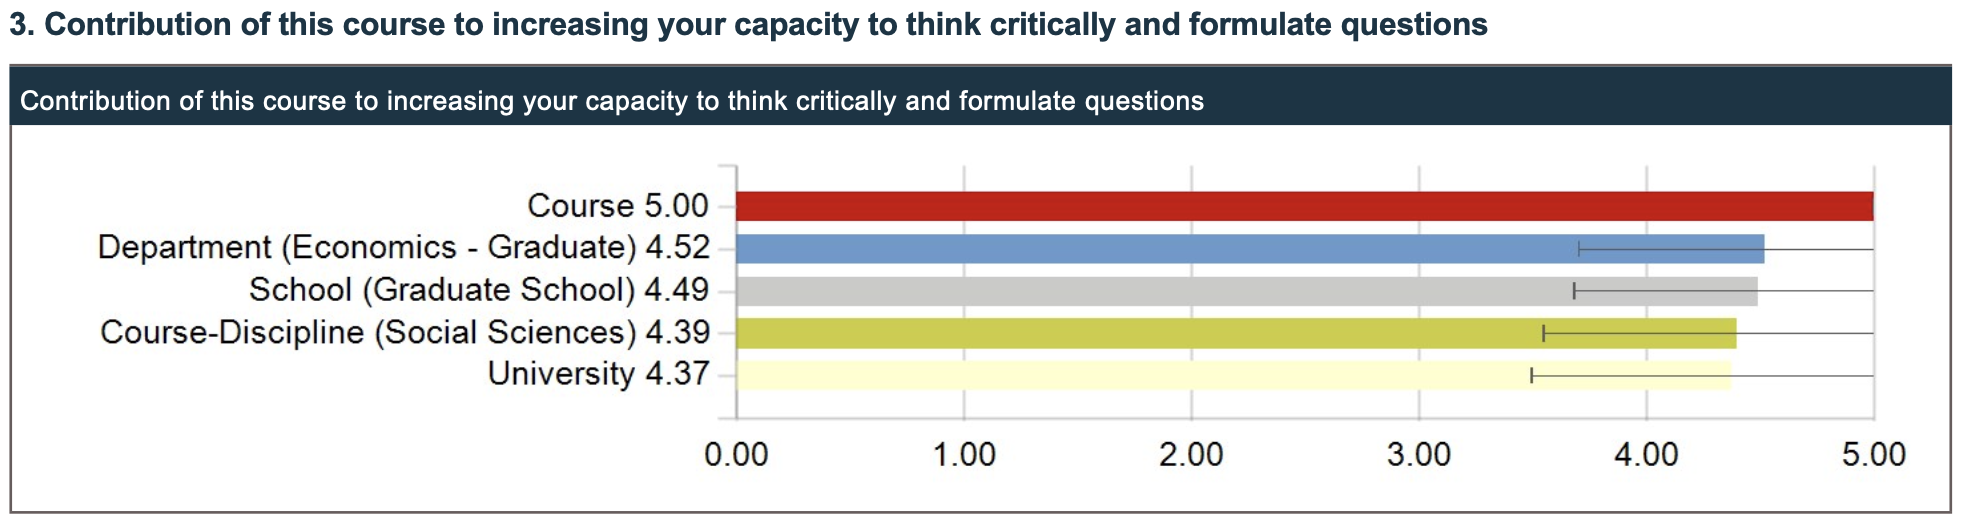 Increasing capacity to think critically and formulate questions 5/5